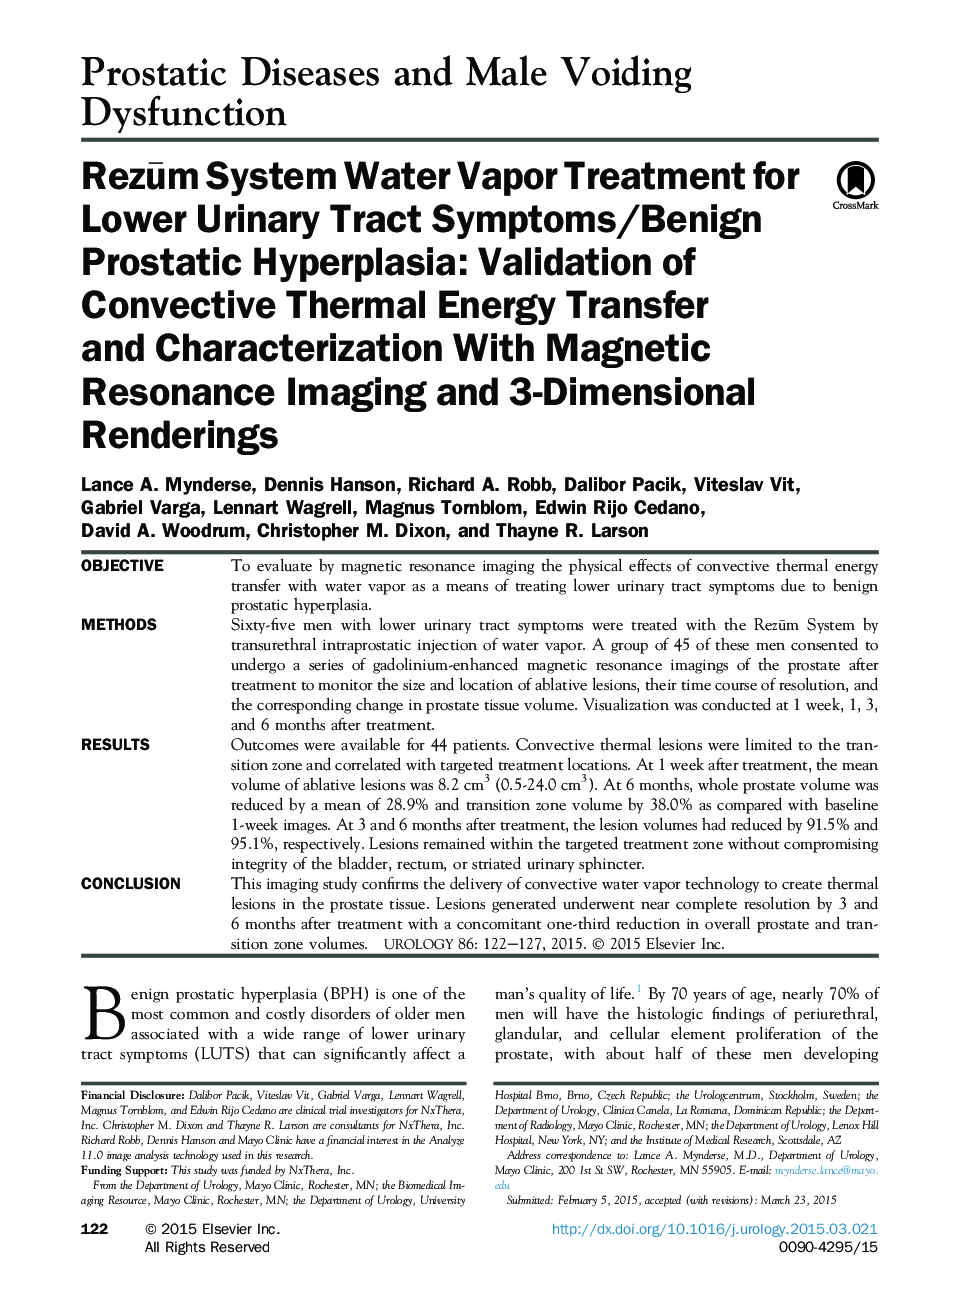 Rezūm System Water Vapor Treatment for Lower Urinary Tract Symptoms/Benign Prostatic Hyperplasia: Validation of Convective Thermal Energy Transfer and Characterization With Magnetic Resonance Imaging and 3-Dimensional Renderings 